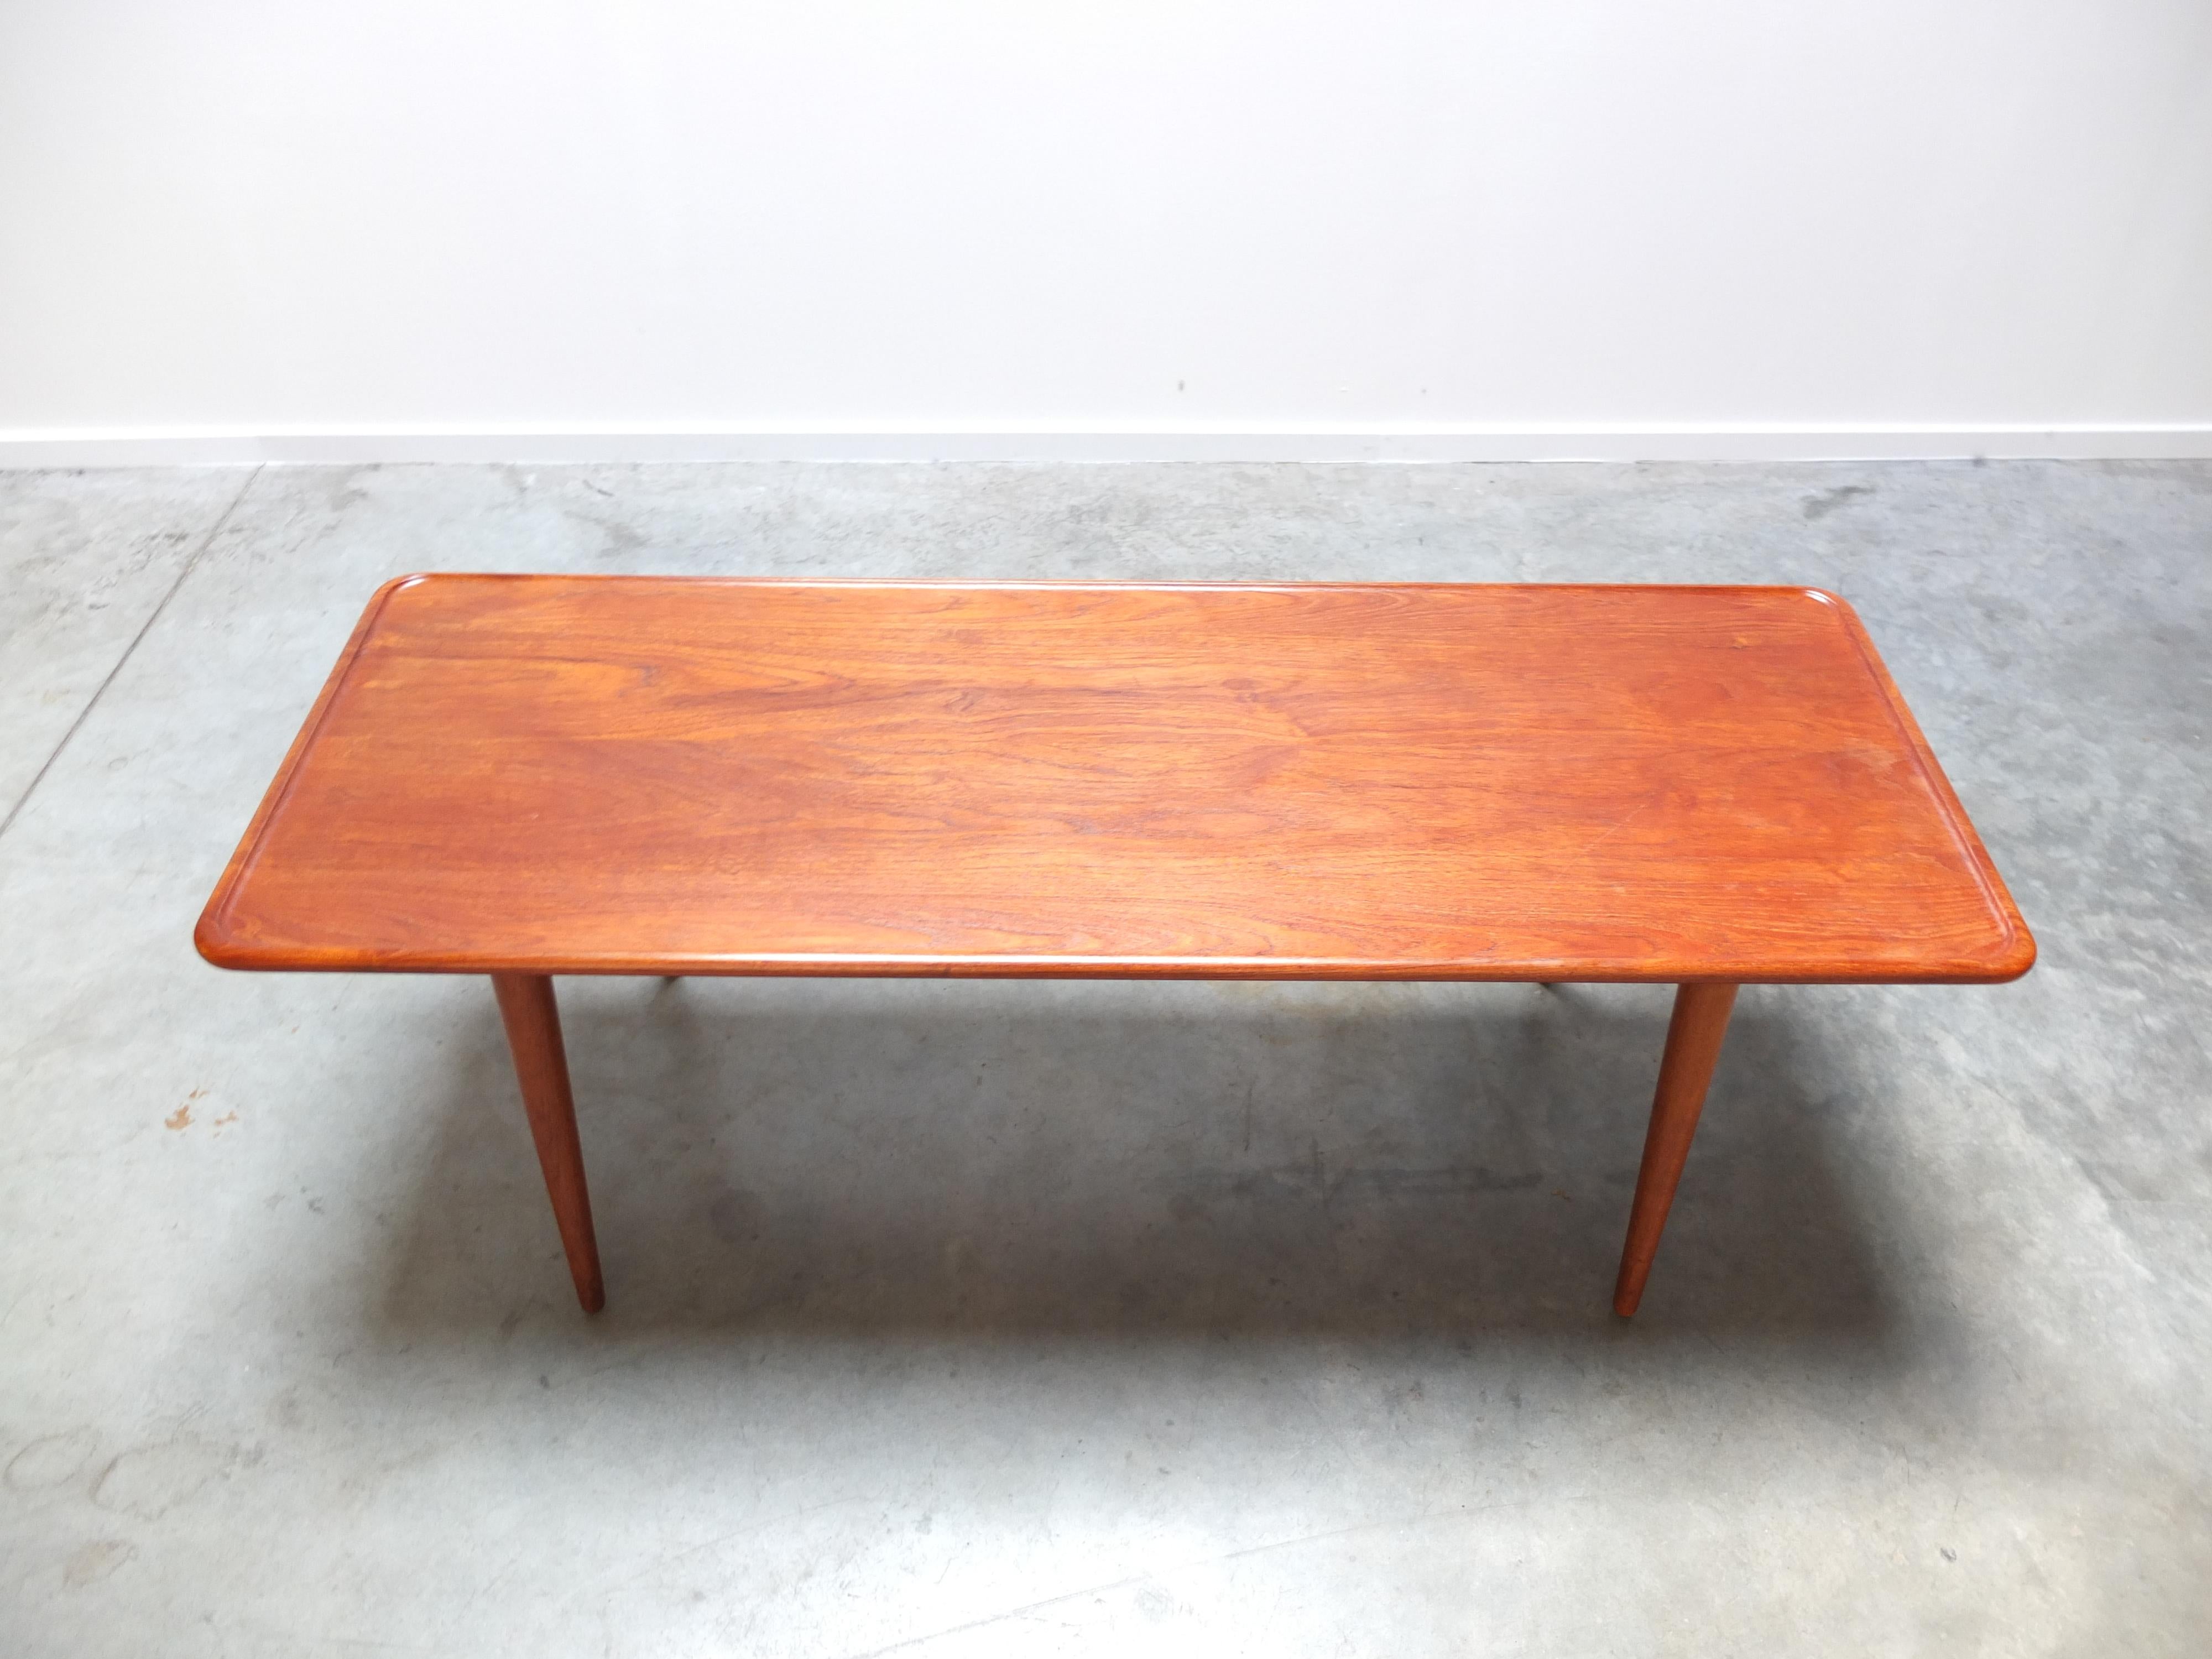 Teak & Oak 'At-11' Coffee Table by Hans Wegner for Andreas Tuck, 1950s For Sale 1